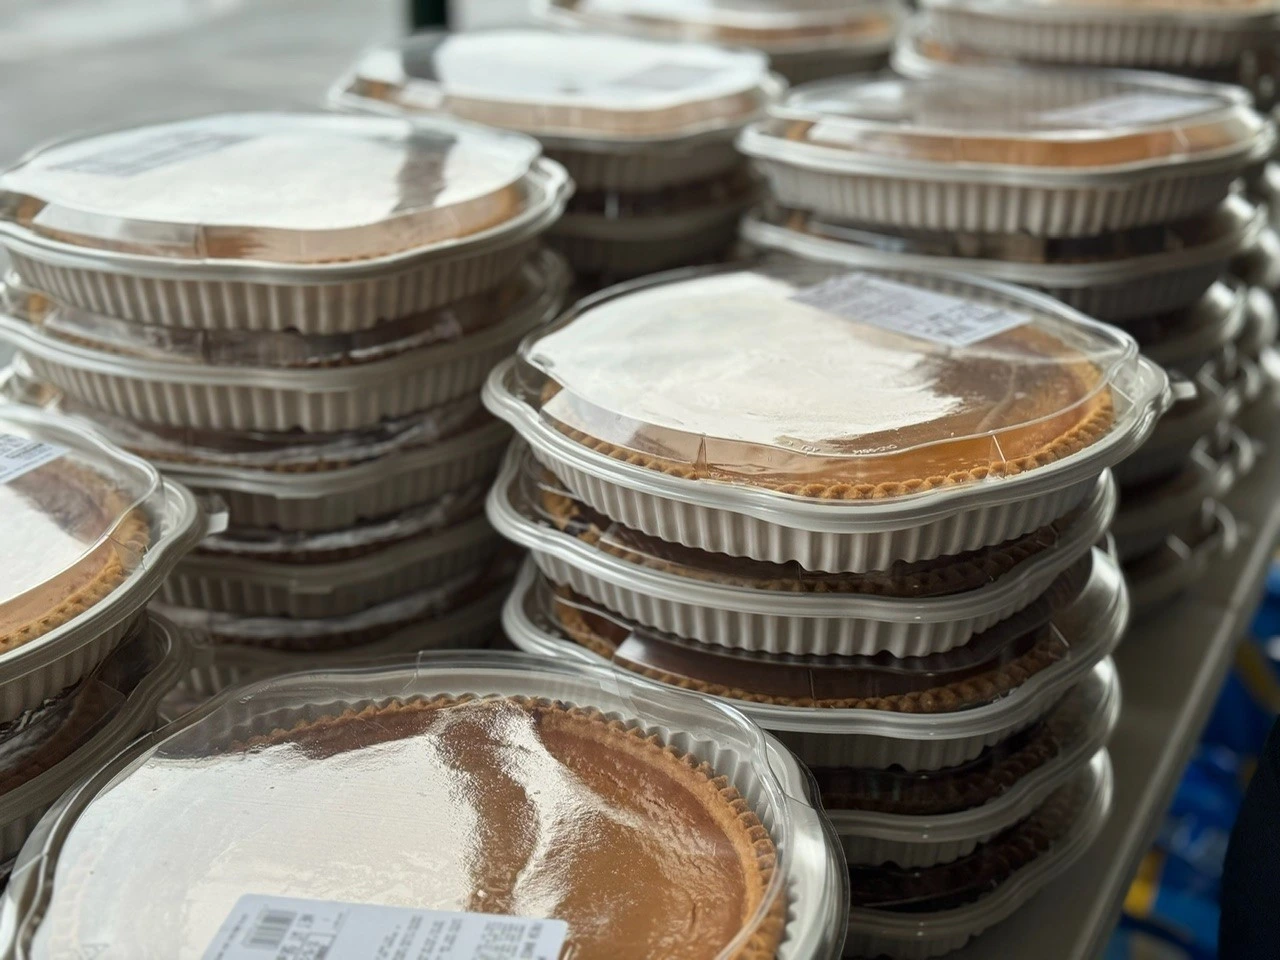 Pies collected by the S&S Roofing for the Maryville Elementary School Christmas Food Drive 